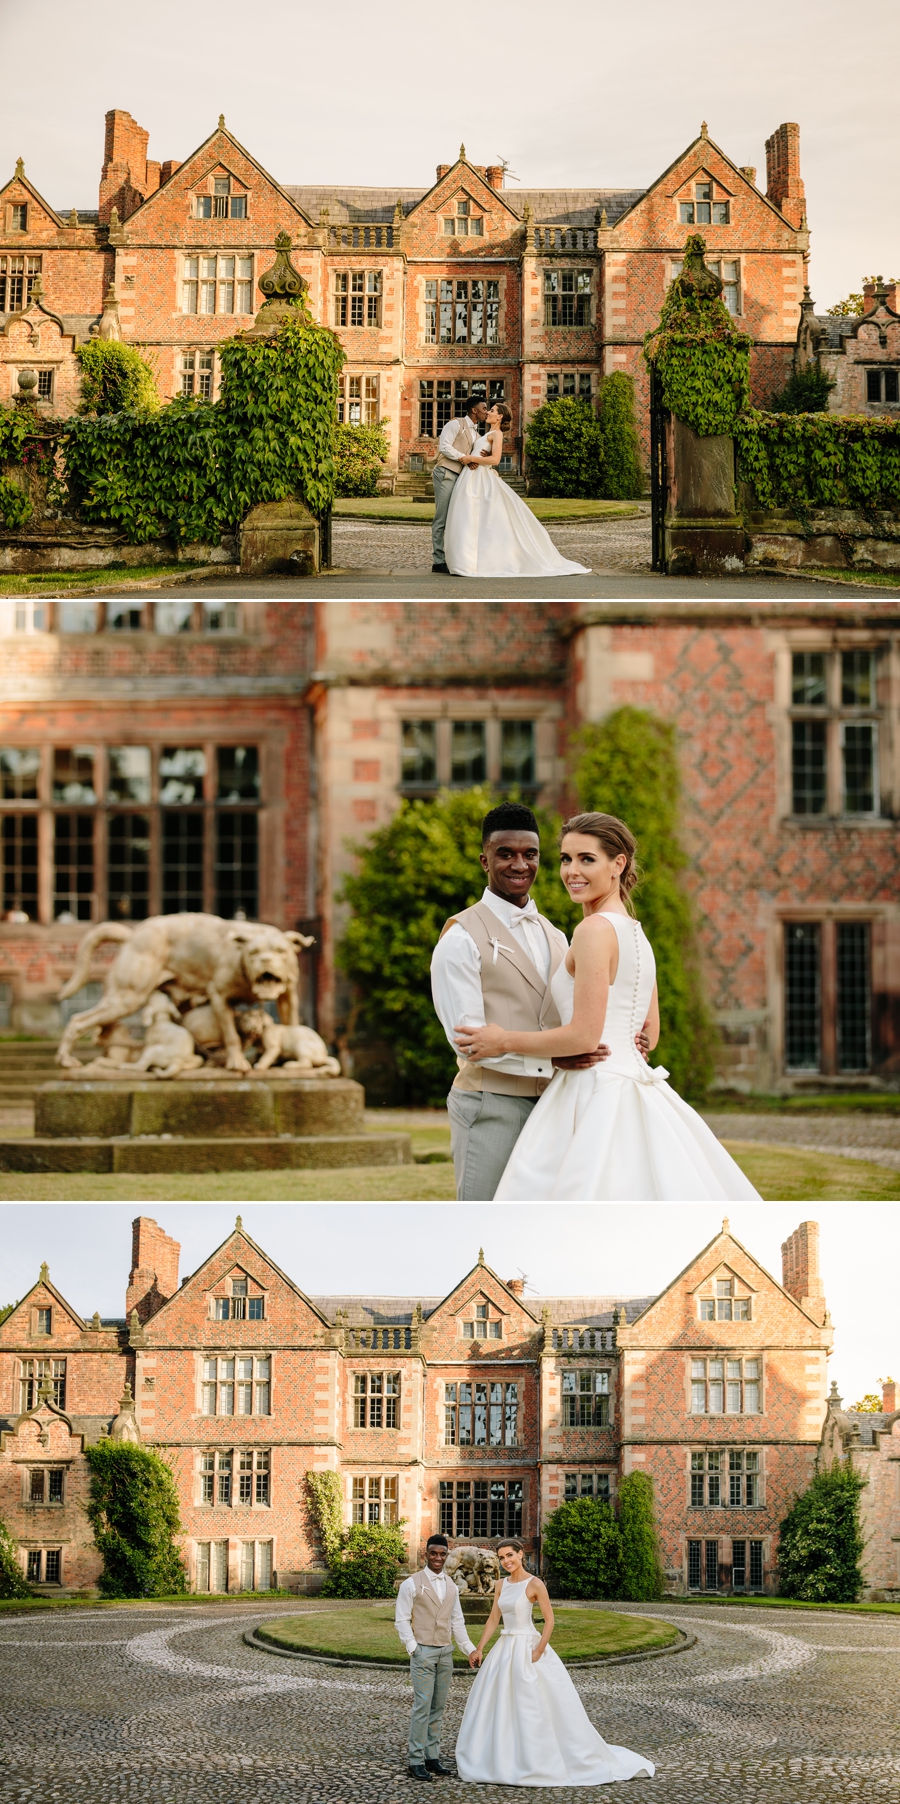 Bride and groom in front of Dorfold Hall